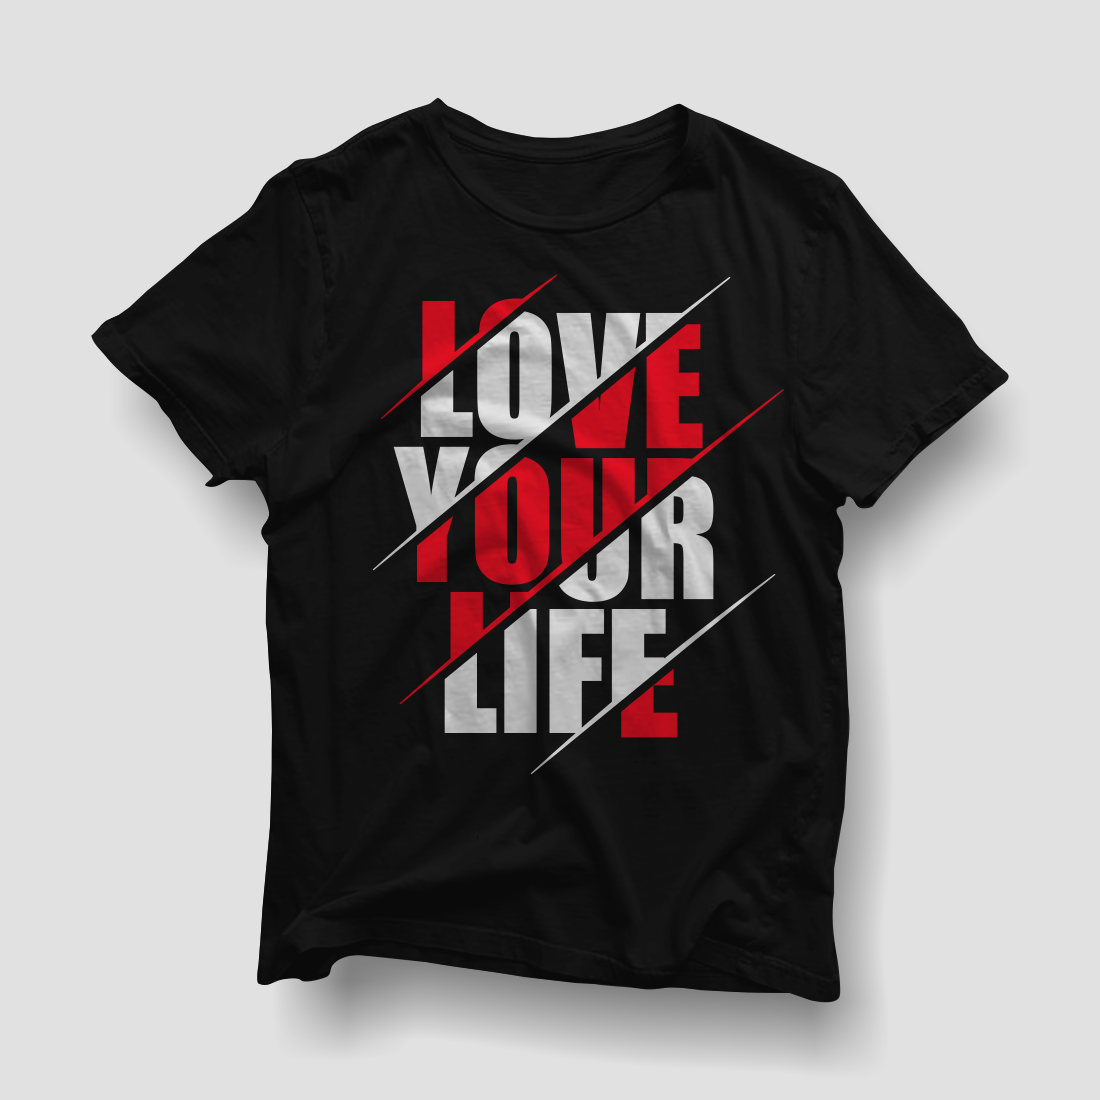 Love Your Life - Lettering Typography T-shirt Design